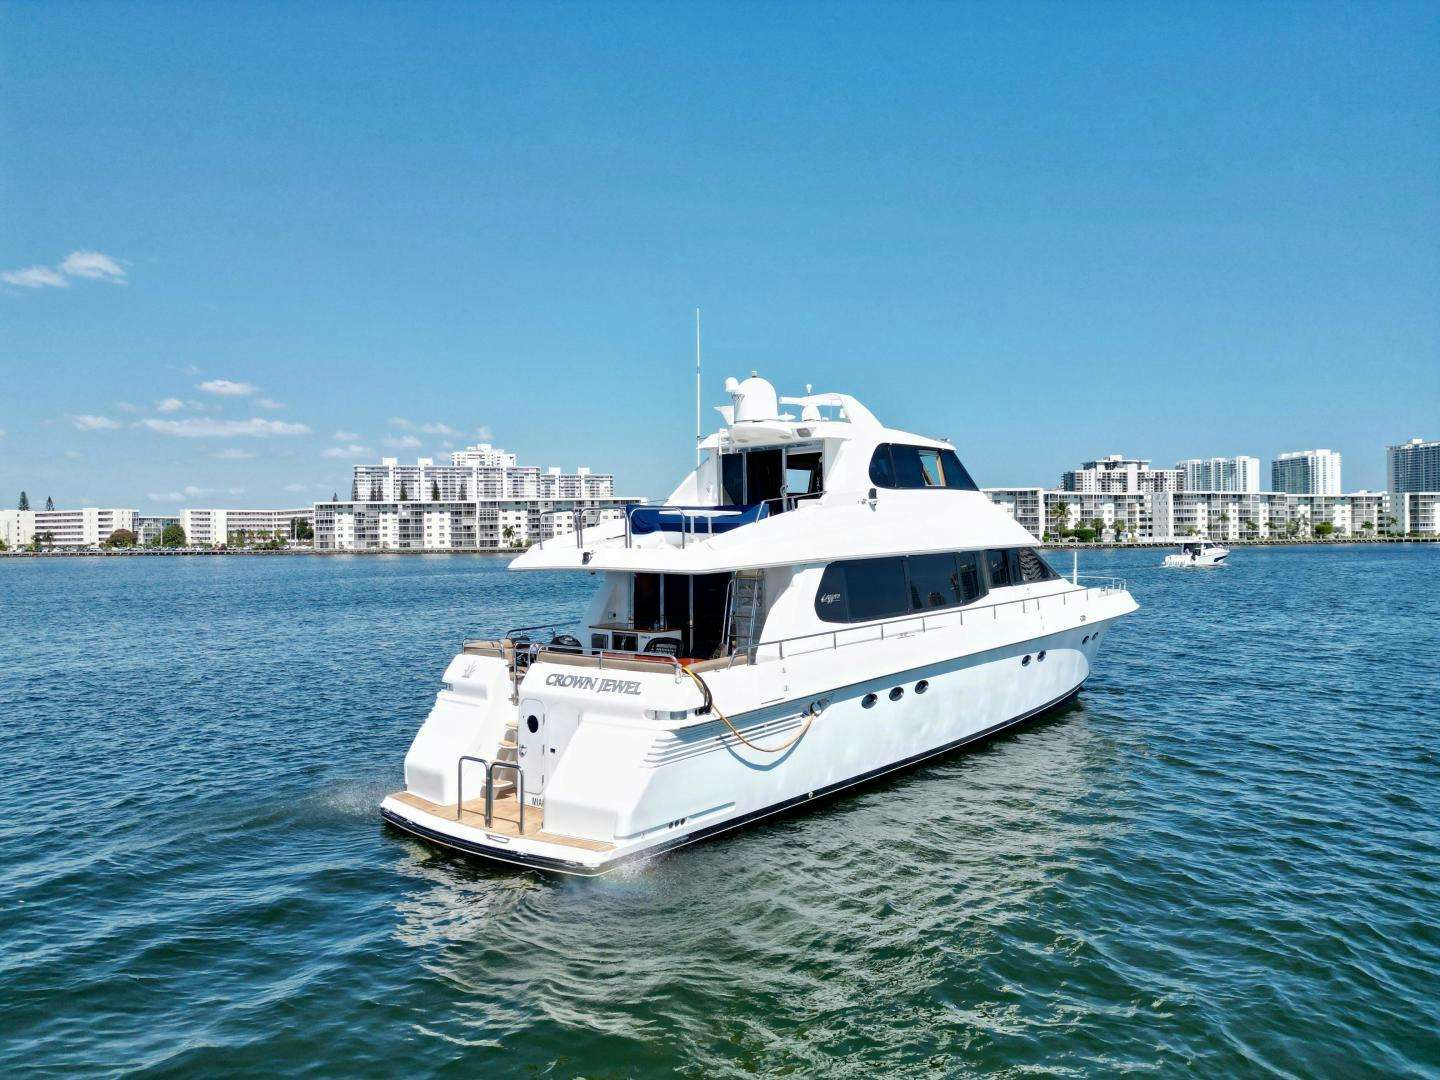 Crown jewel
Yacht for Sale